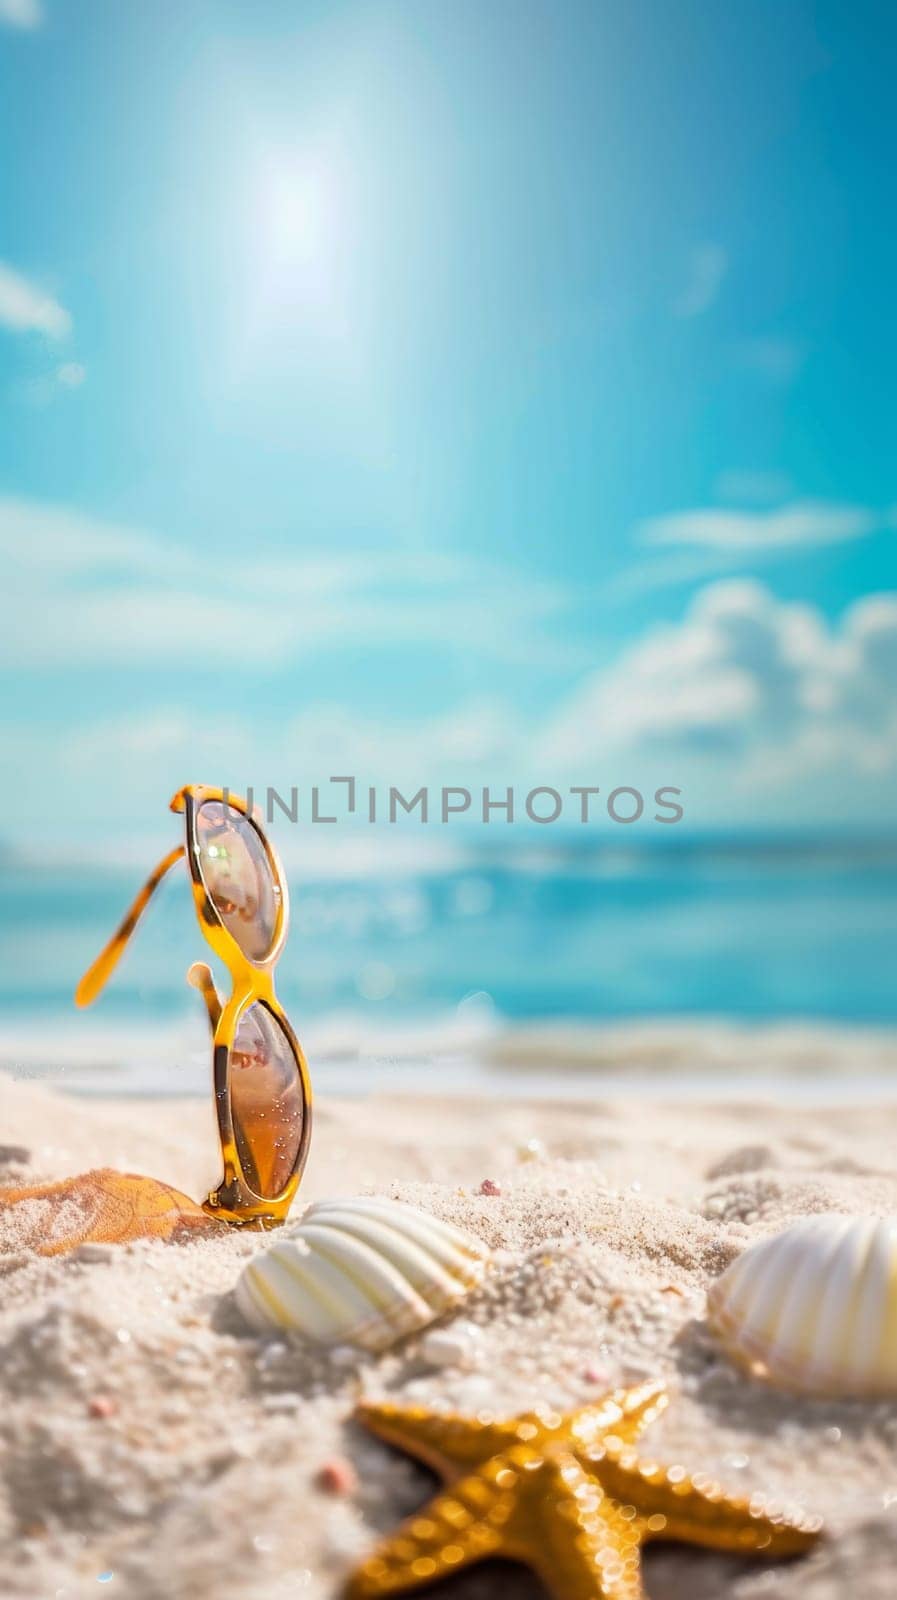 A pair of sunglasses stands sentinel on the sandy shore, flanked by starfish and seashells, under the watchful gaze of the summer sun by sfinks